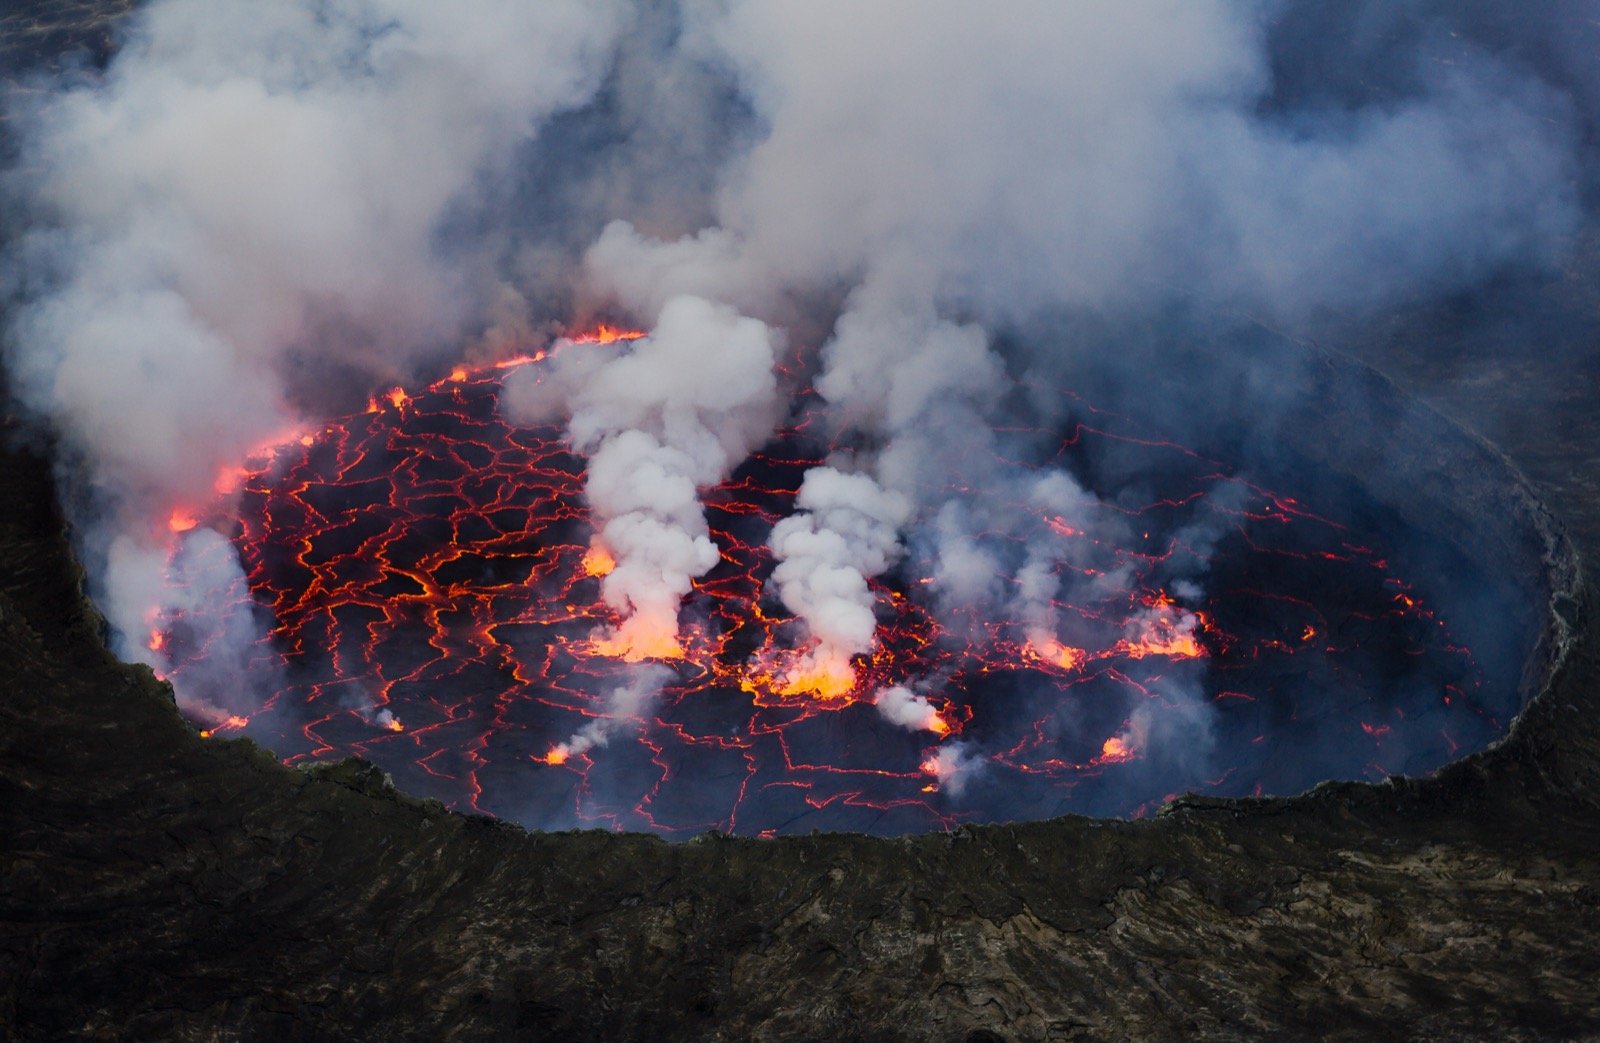 Can You Get at Least 75% On This 24-Question Geography Test Without Googling? Mount Nyiragongo, Democratic Republic Of The Congo, volcano volcanic